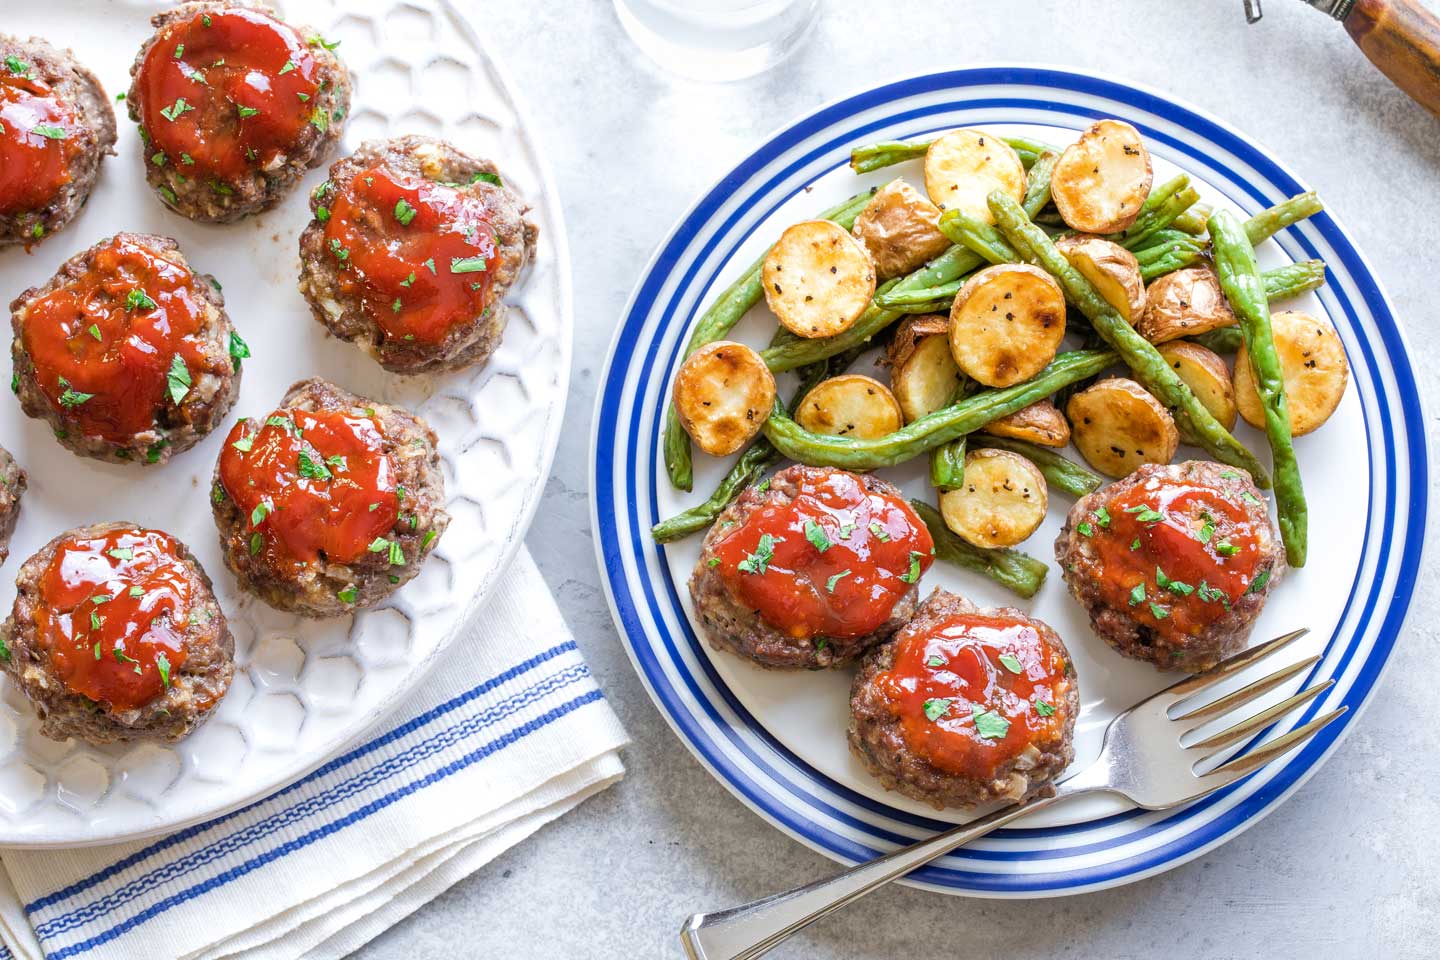 Three mini meatloaf patties served on blue-rimmed plate with vegetable, with a white serving platter full of more meatloaf alongside.